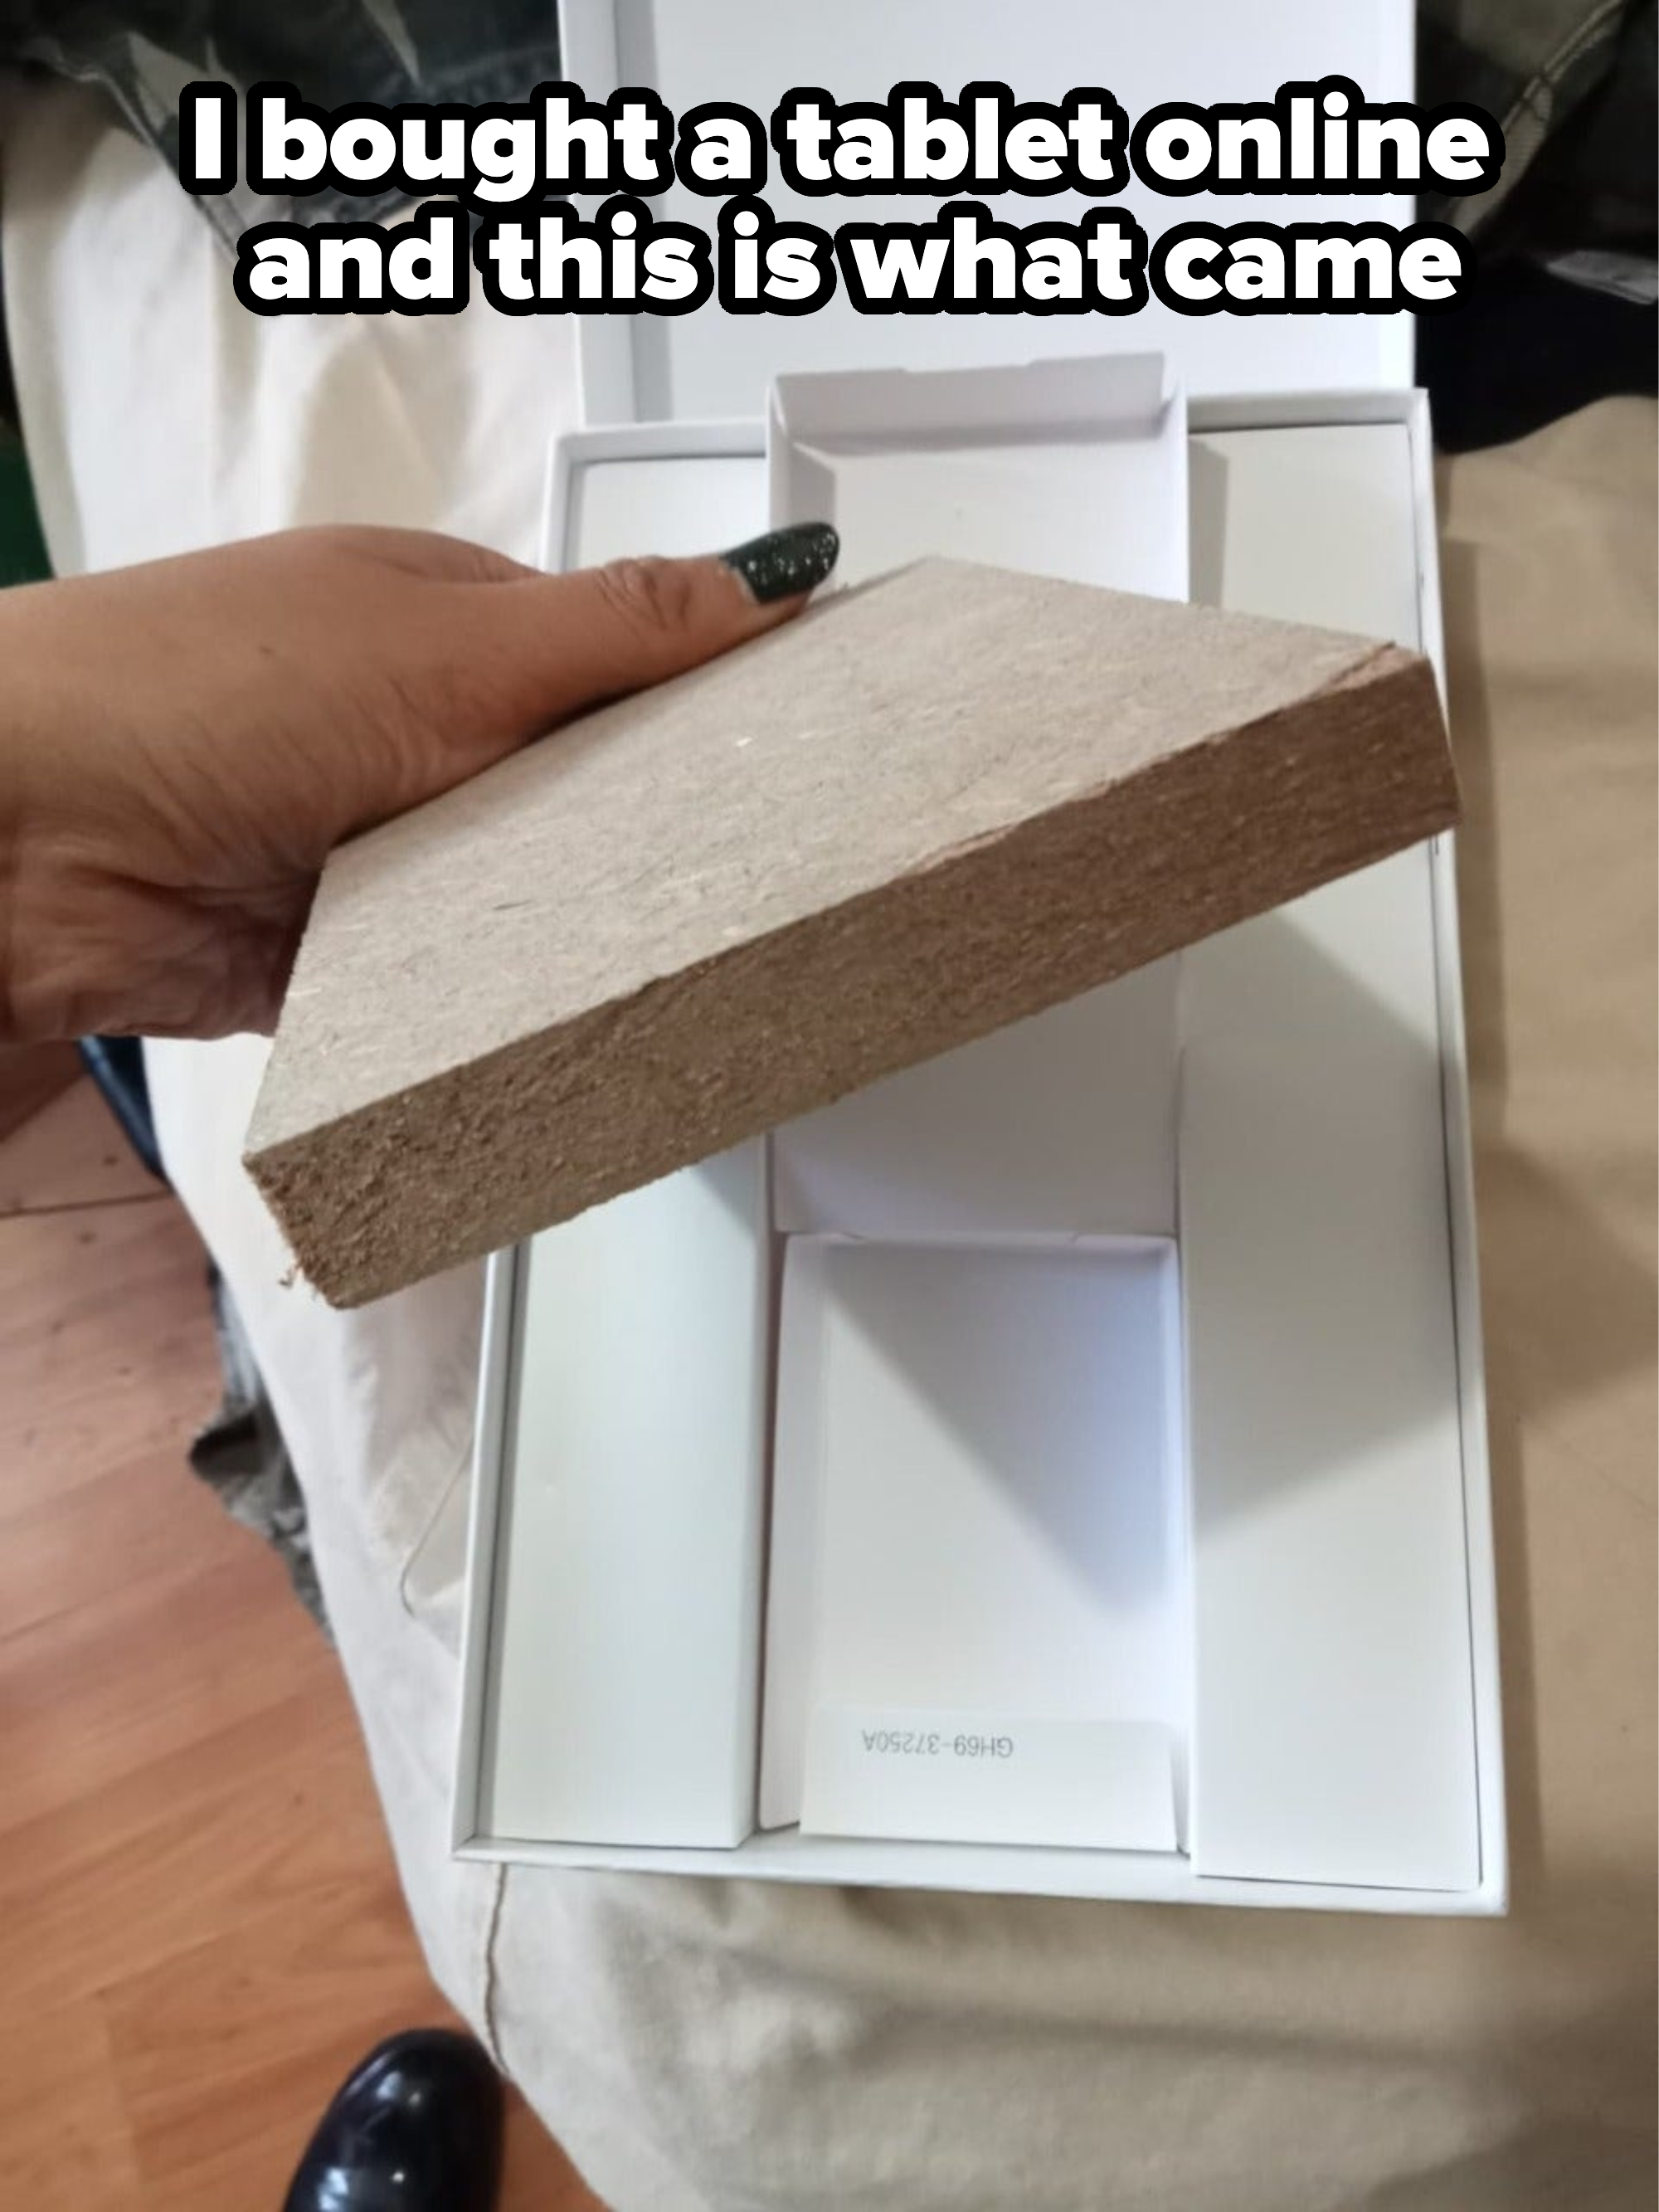 A box with a piece of stone instead of a tablet